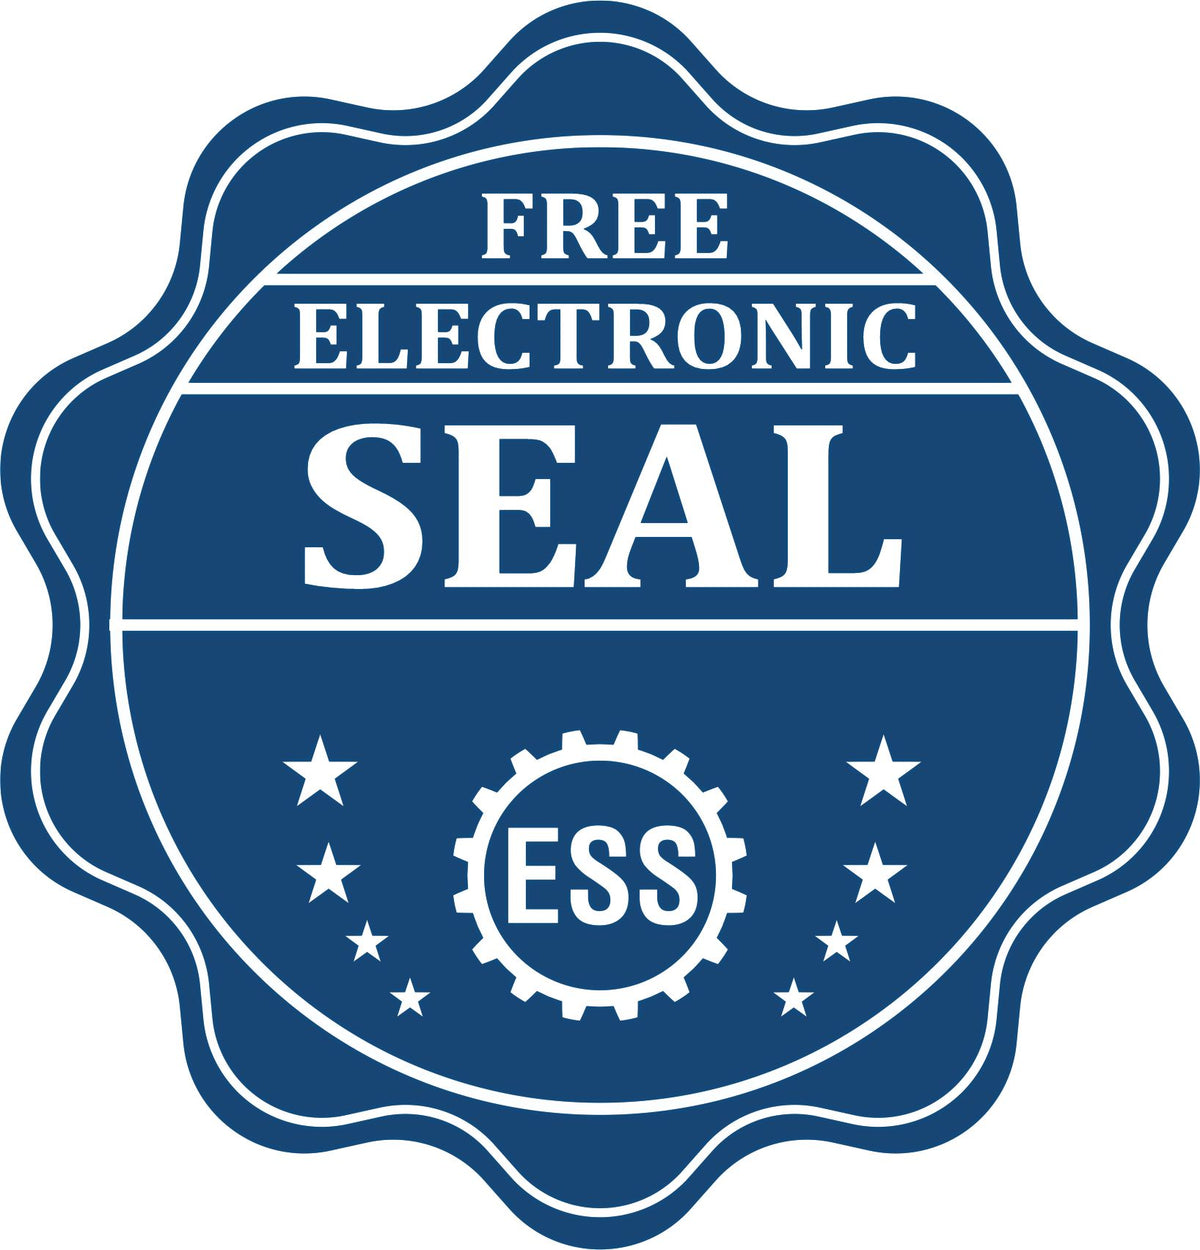 A badge showing a free electronic seal for the Long Reach Florida Land Surveyor Seal with stars and the ESS gear on the emblem.